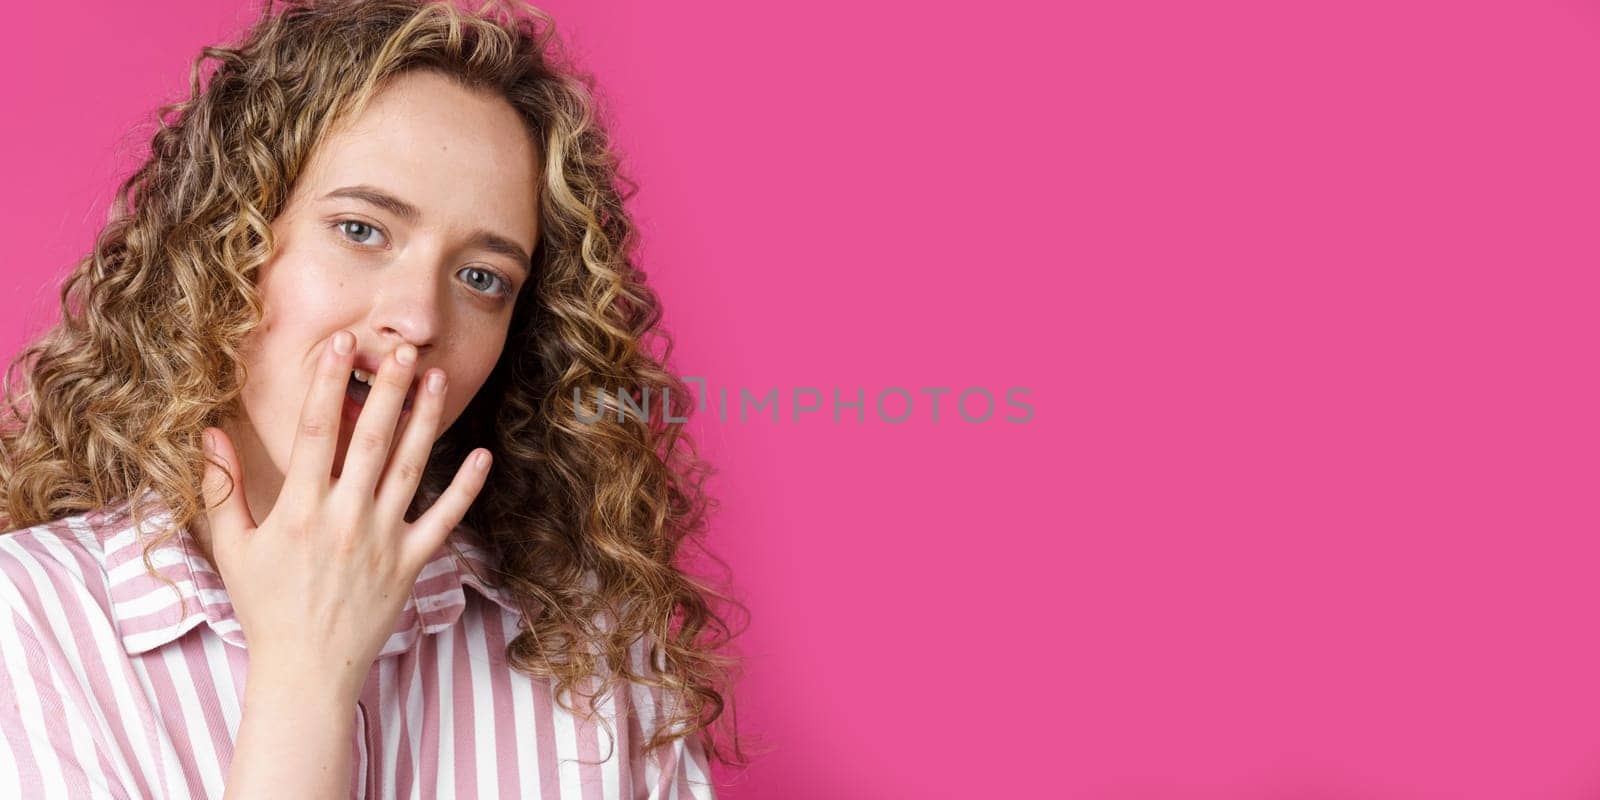 Young beautiful woman covers her face with her hand. Surprised look. Isolated pink background